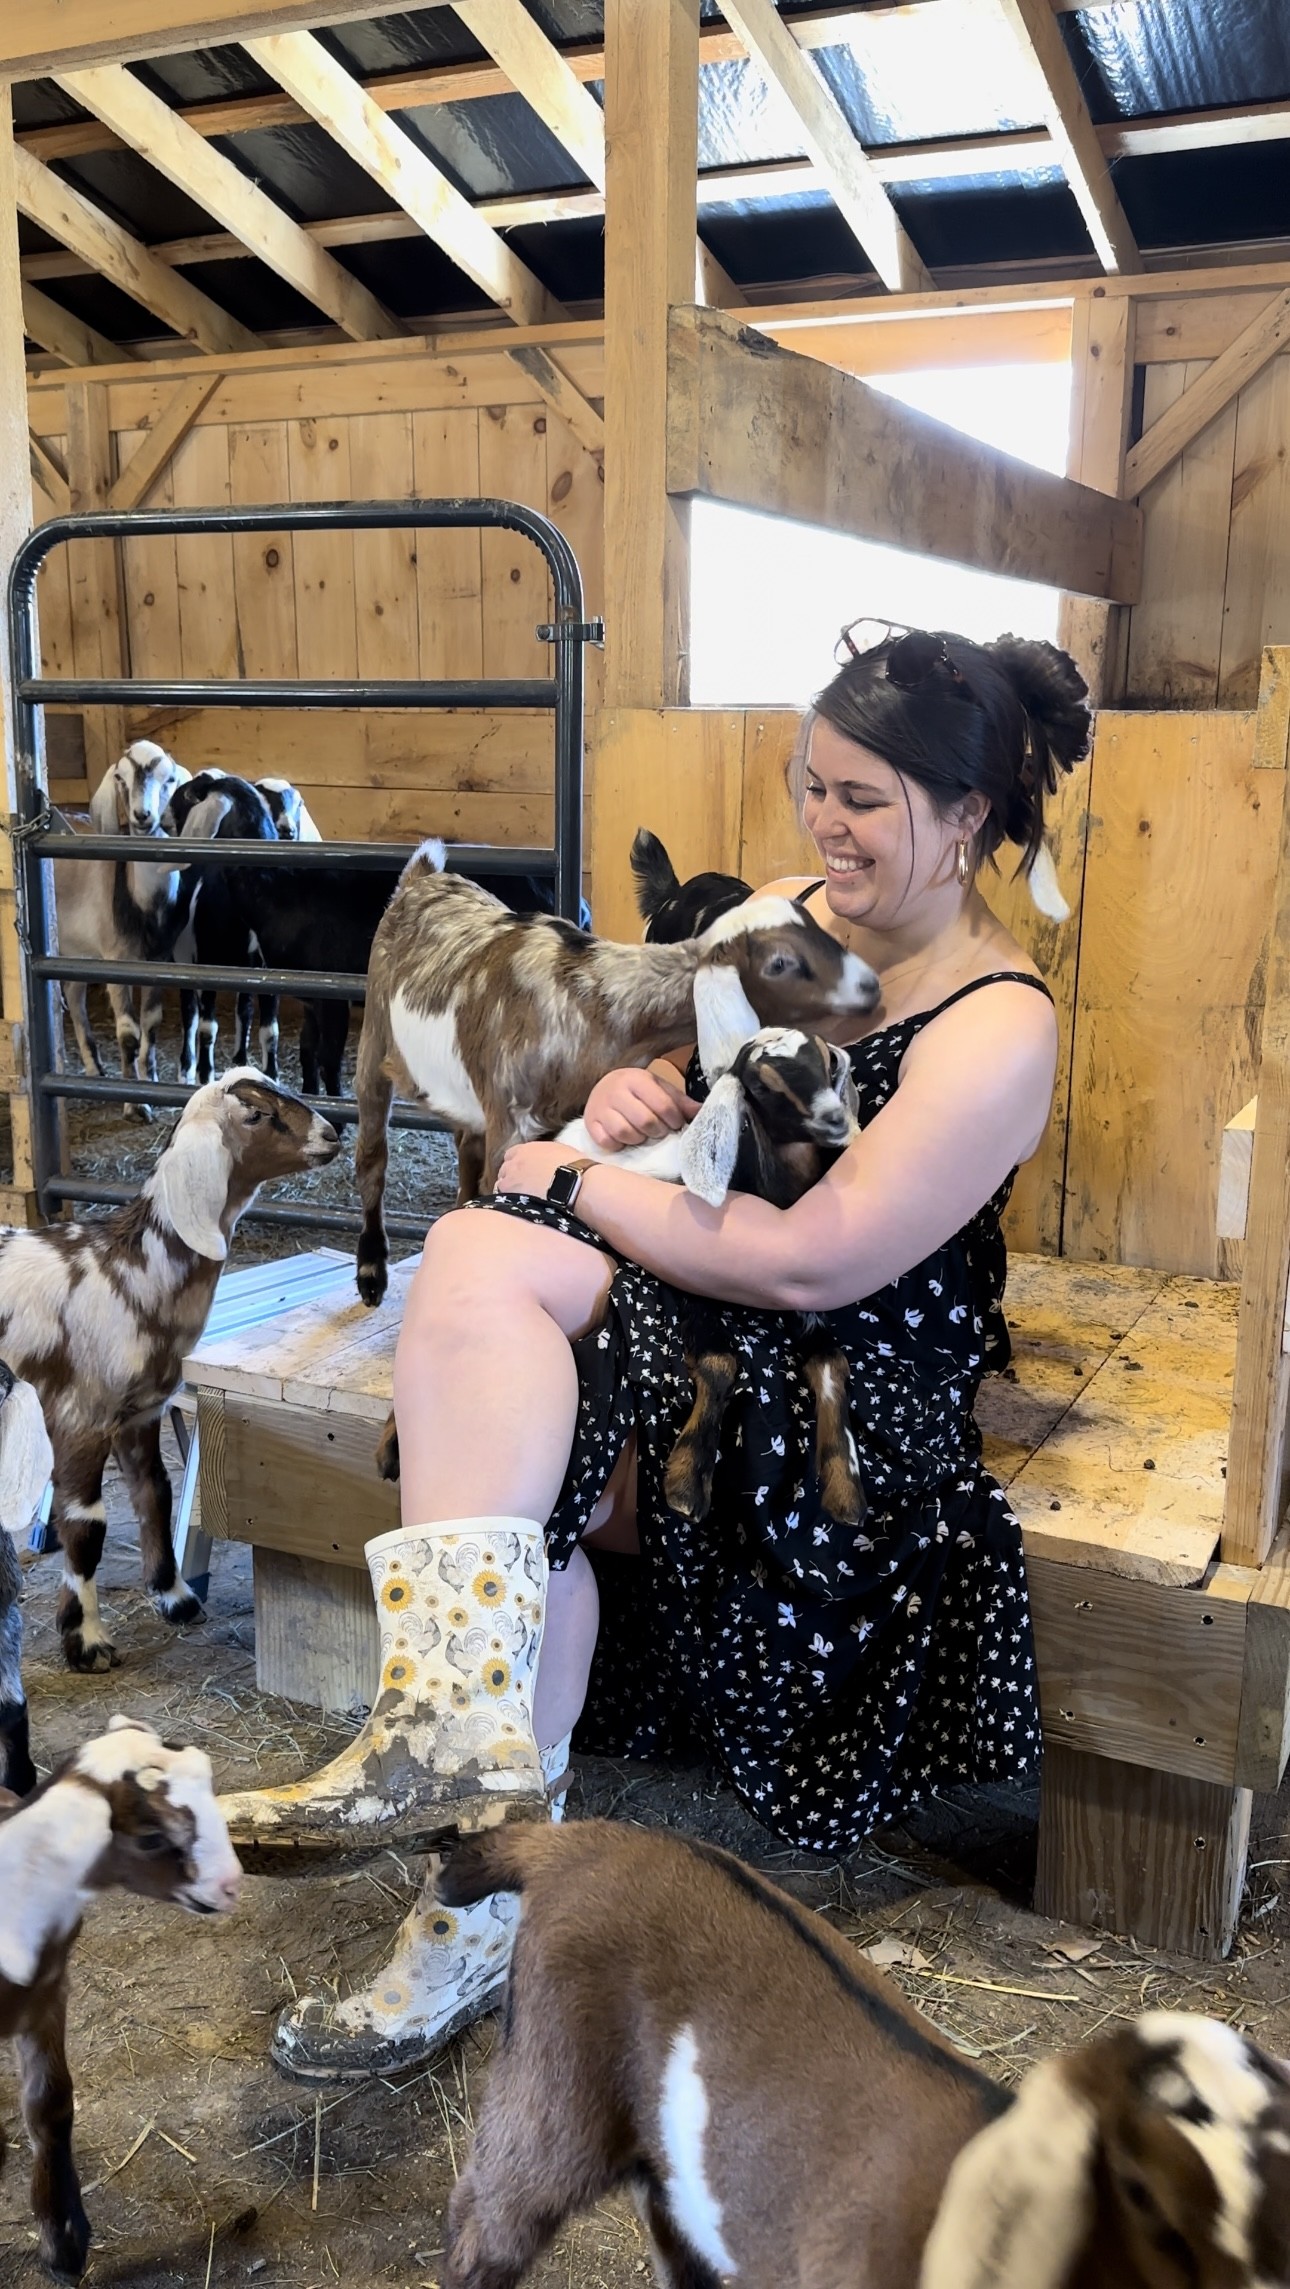 Marshall, smiling, sits on a wooden platform in a barn surrounded by small brown and white goats. Marshall is wearing a black patterned dress and flower-print galoshes. 